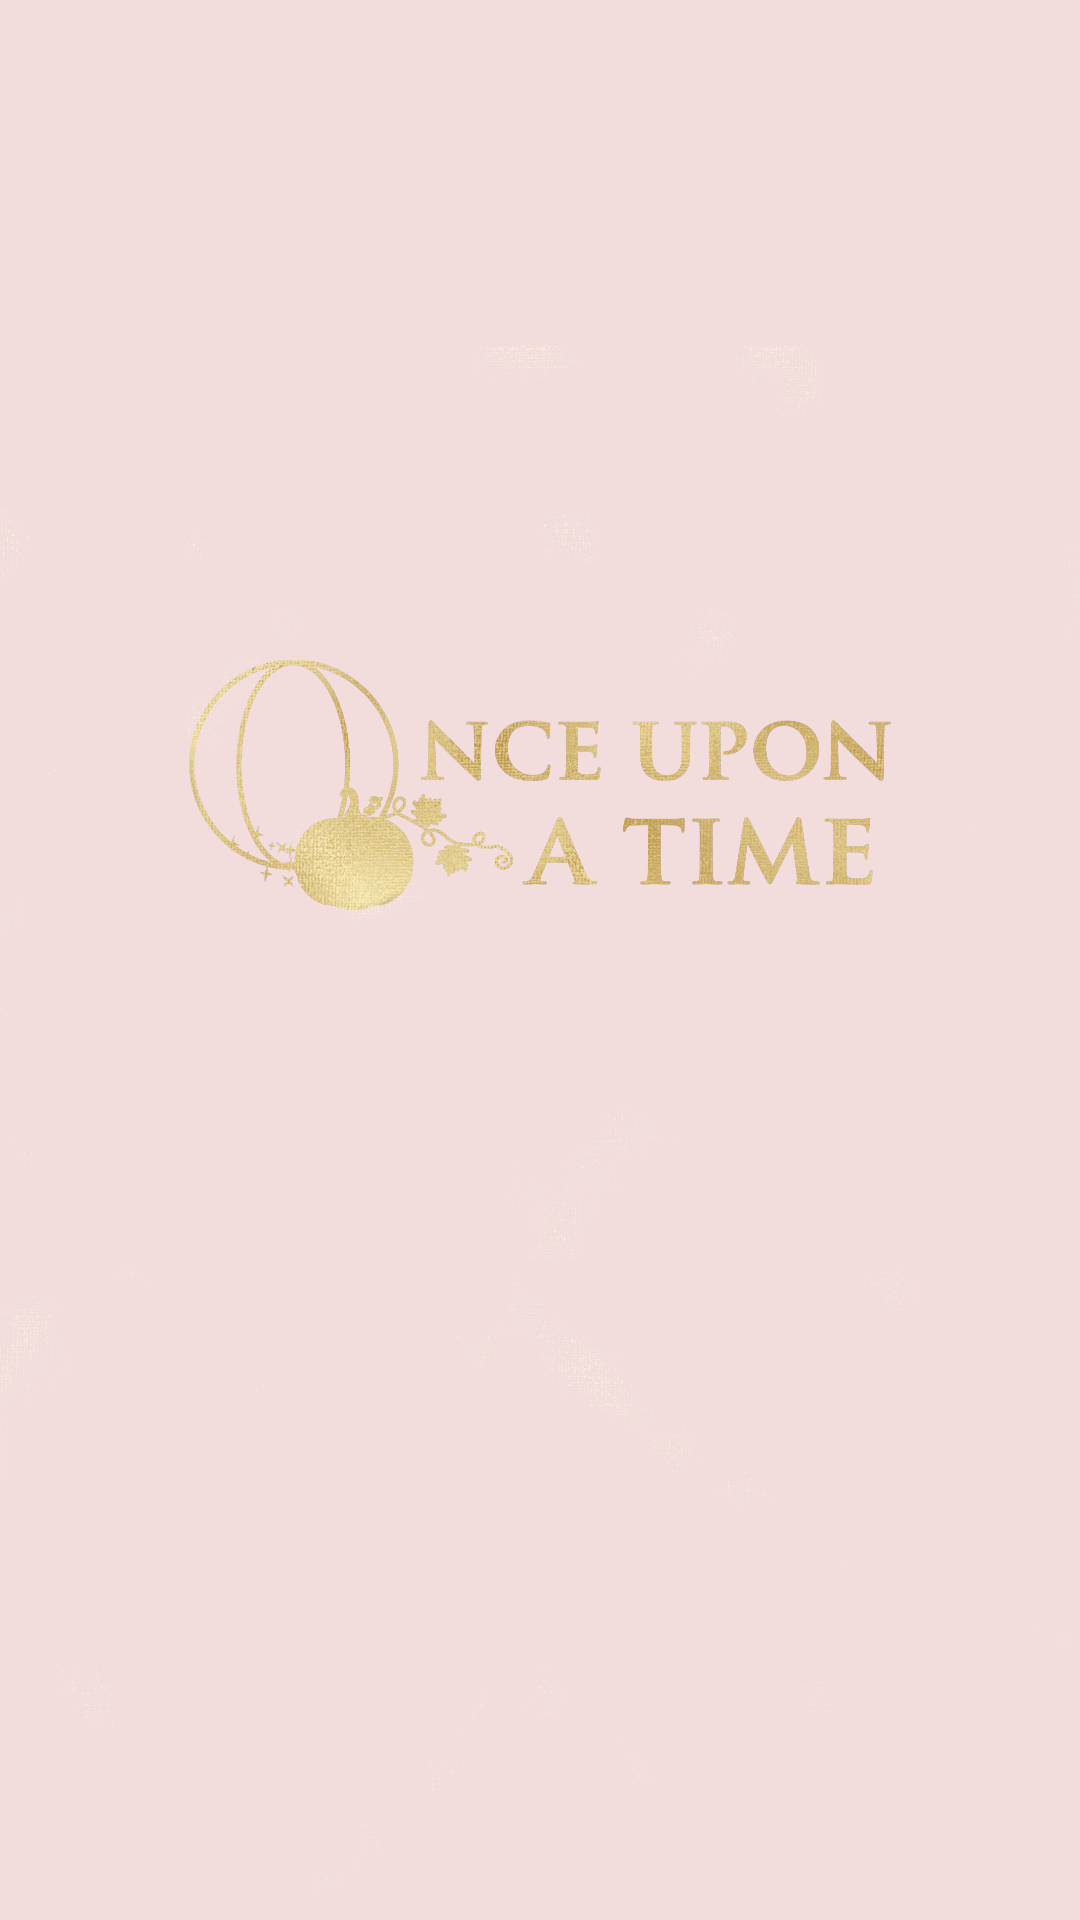 Cute Disney Once Upon A Time Wallpaper